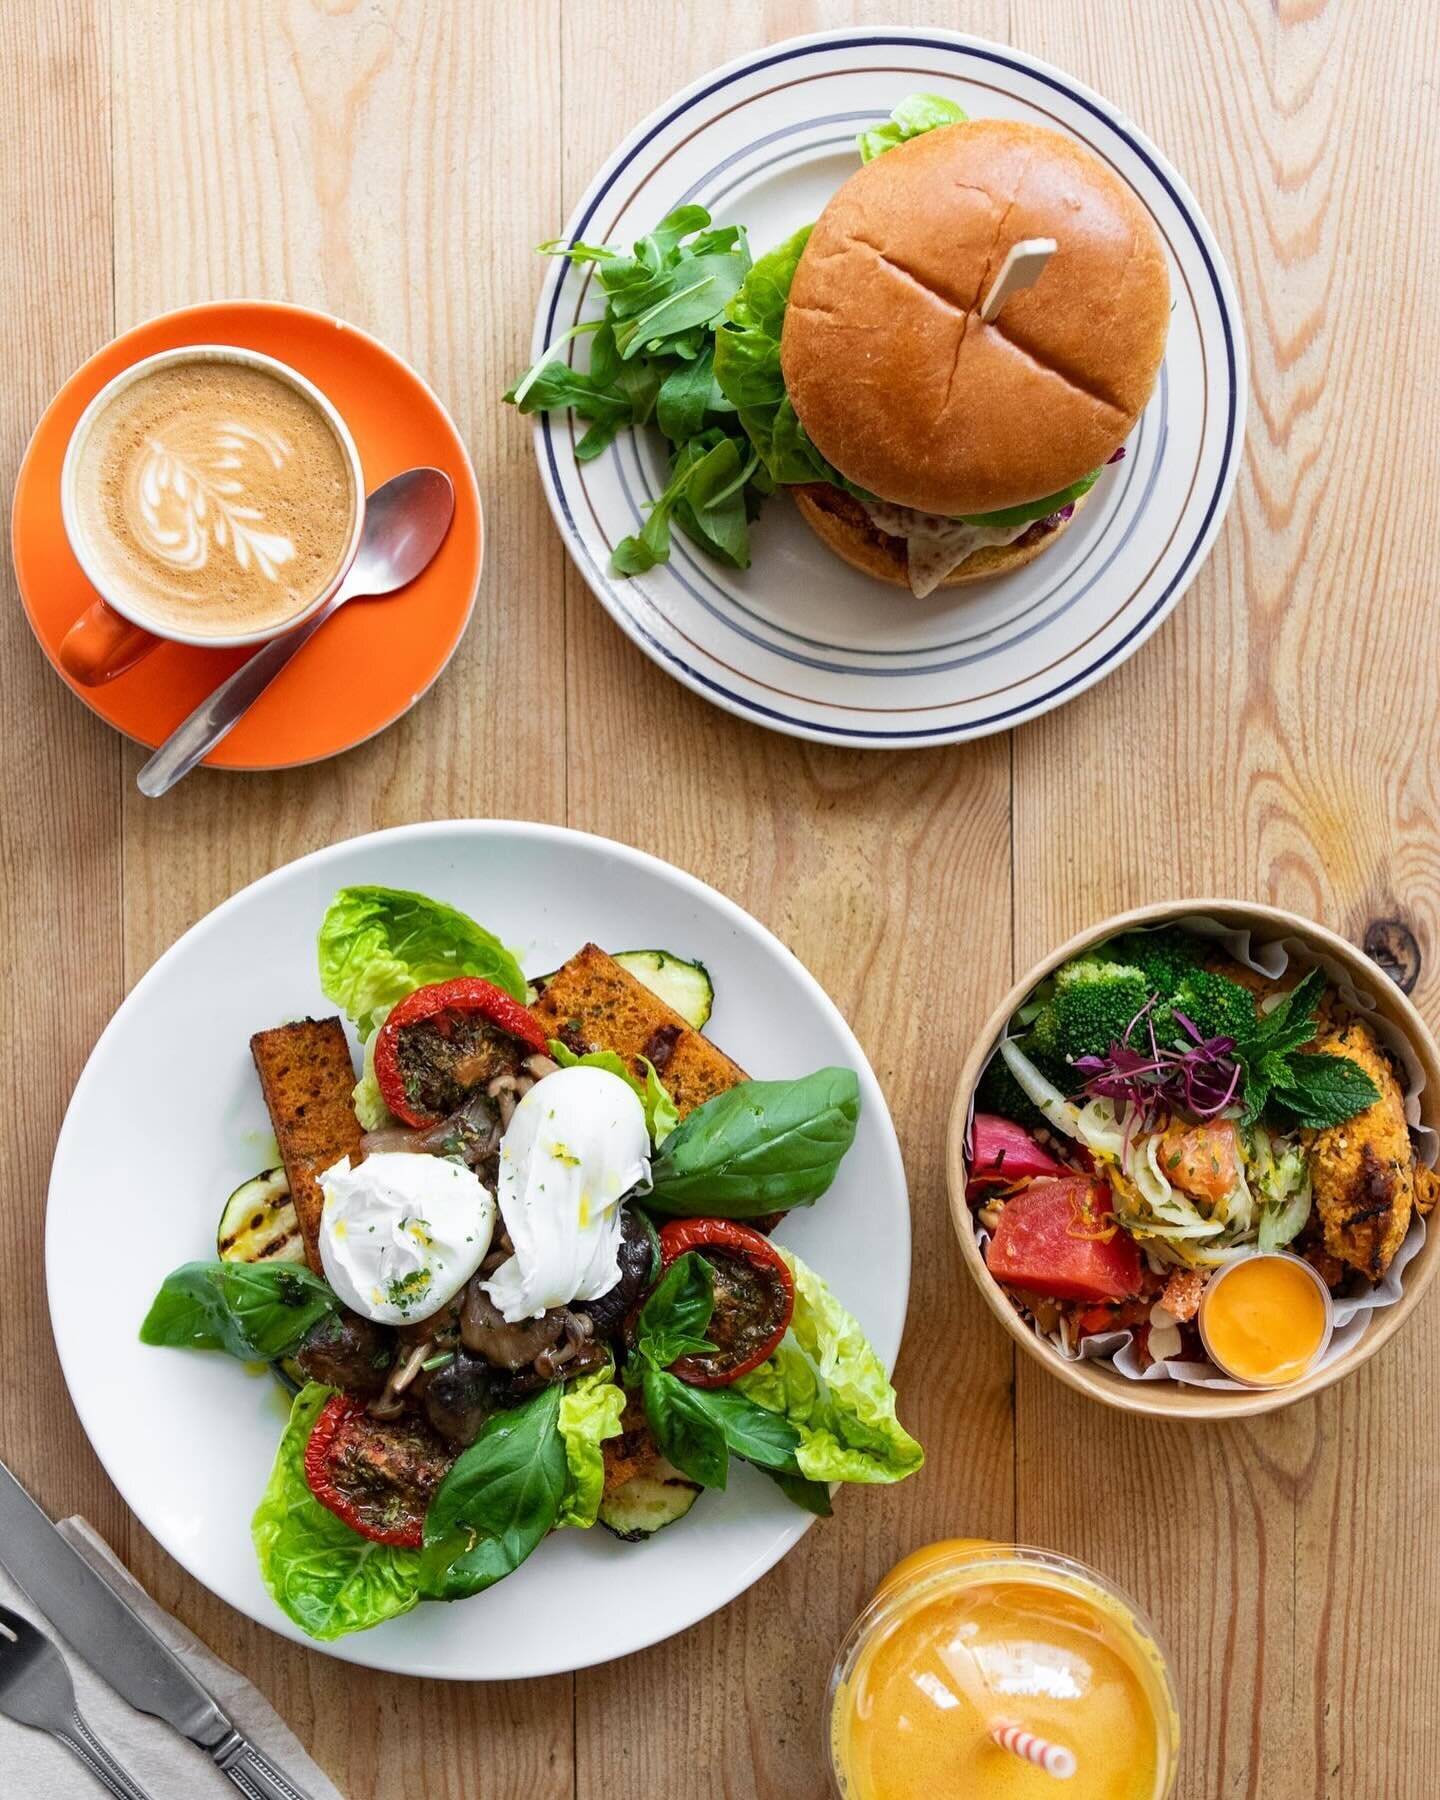 Another absolute delight of Kemptown Village, lovely Fran and her team at @eggandspoon1 serve up hearty brunches, delicious homemade bakes, and the most incredible fish finger sandwich that might just be Brighton's best kept secret 🫢⁠
⁠
Well worth a